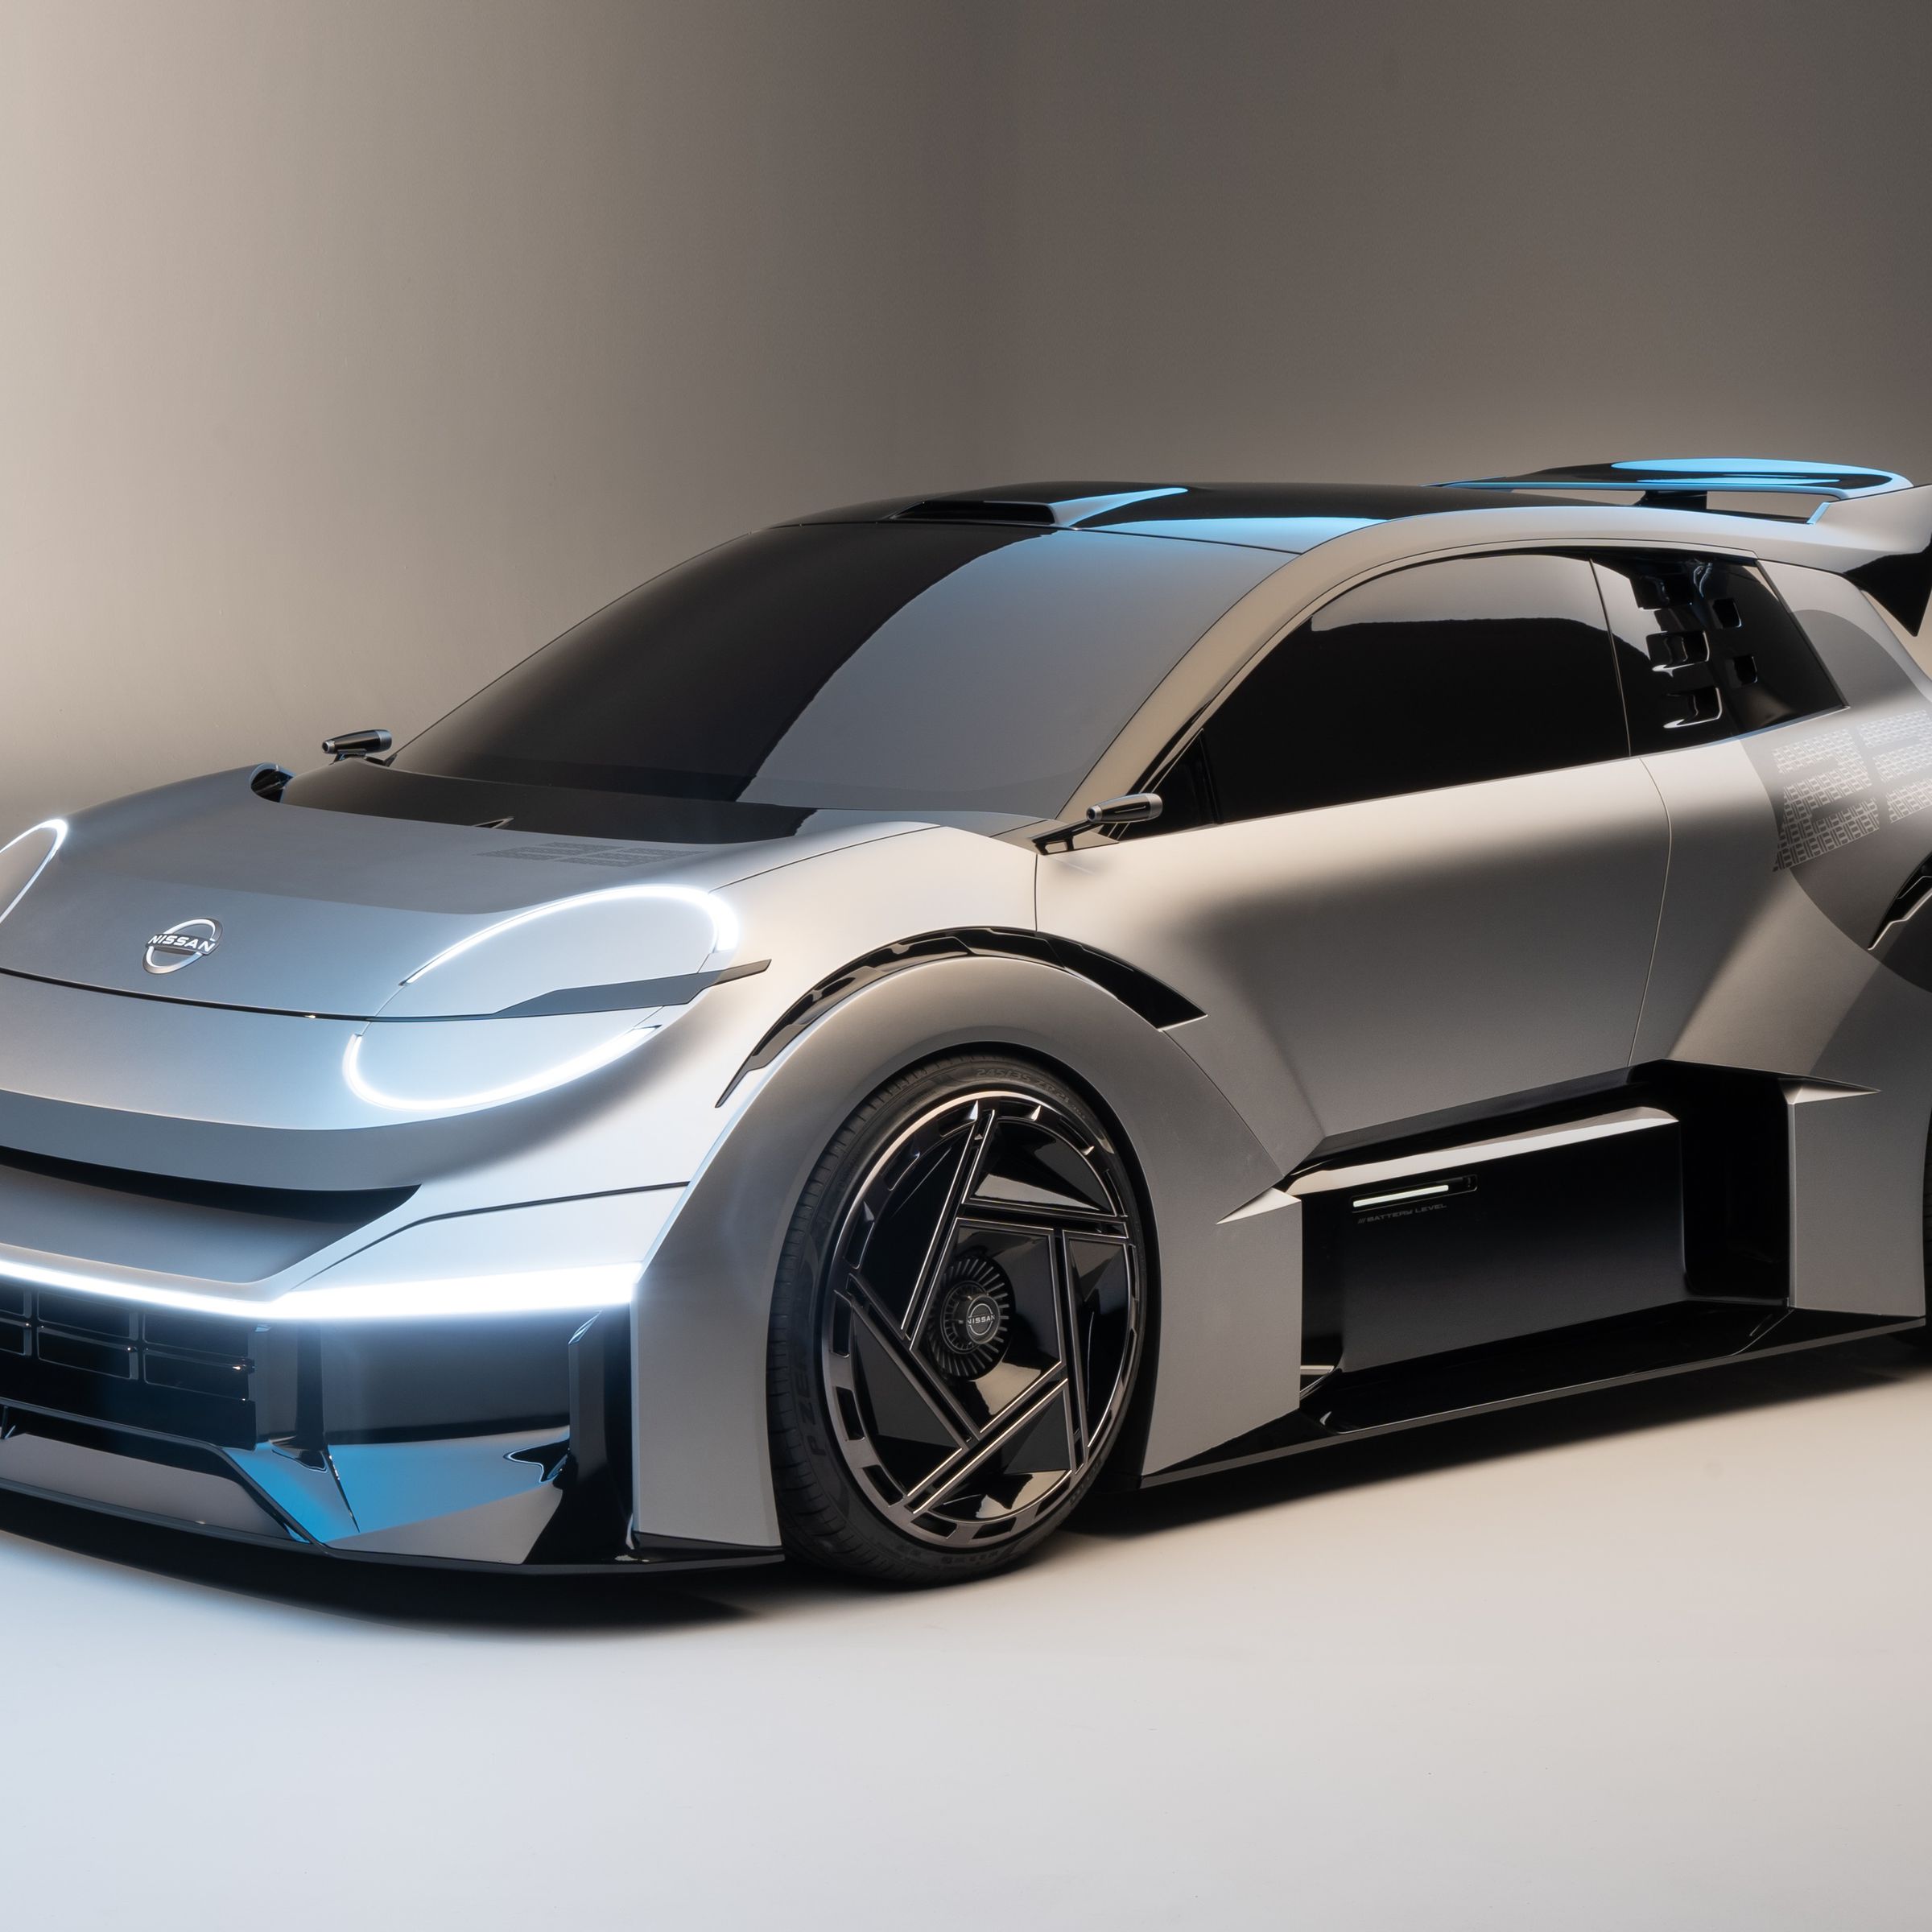 Render of a micro Machines-looking car from Nissan, has circle-outlined daytime running lights and a large spoiler on the top of the rear hatch, and it’s low with really big rims.